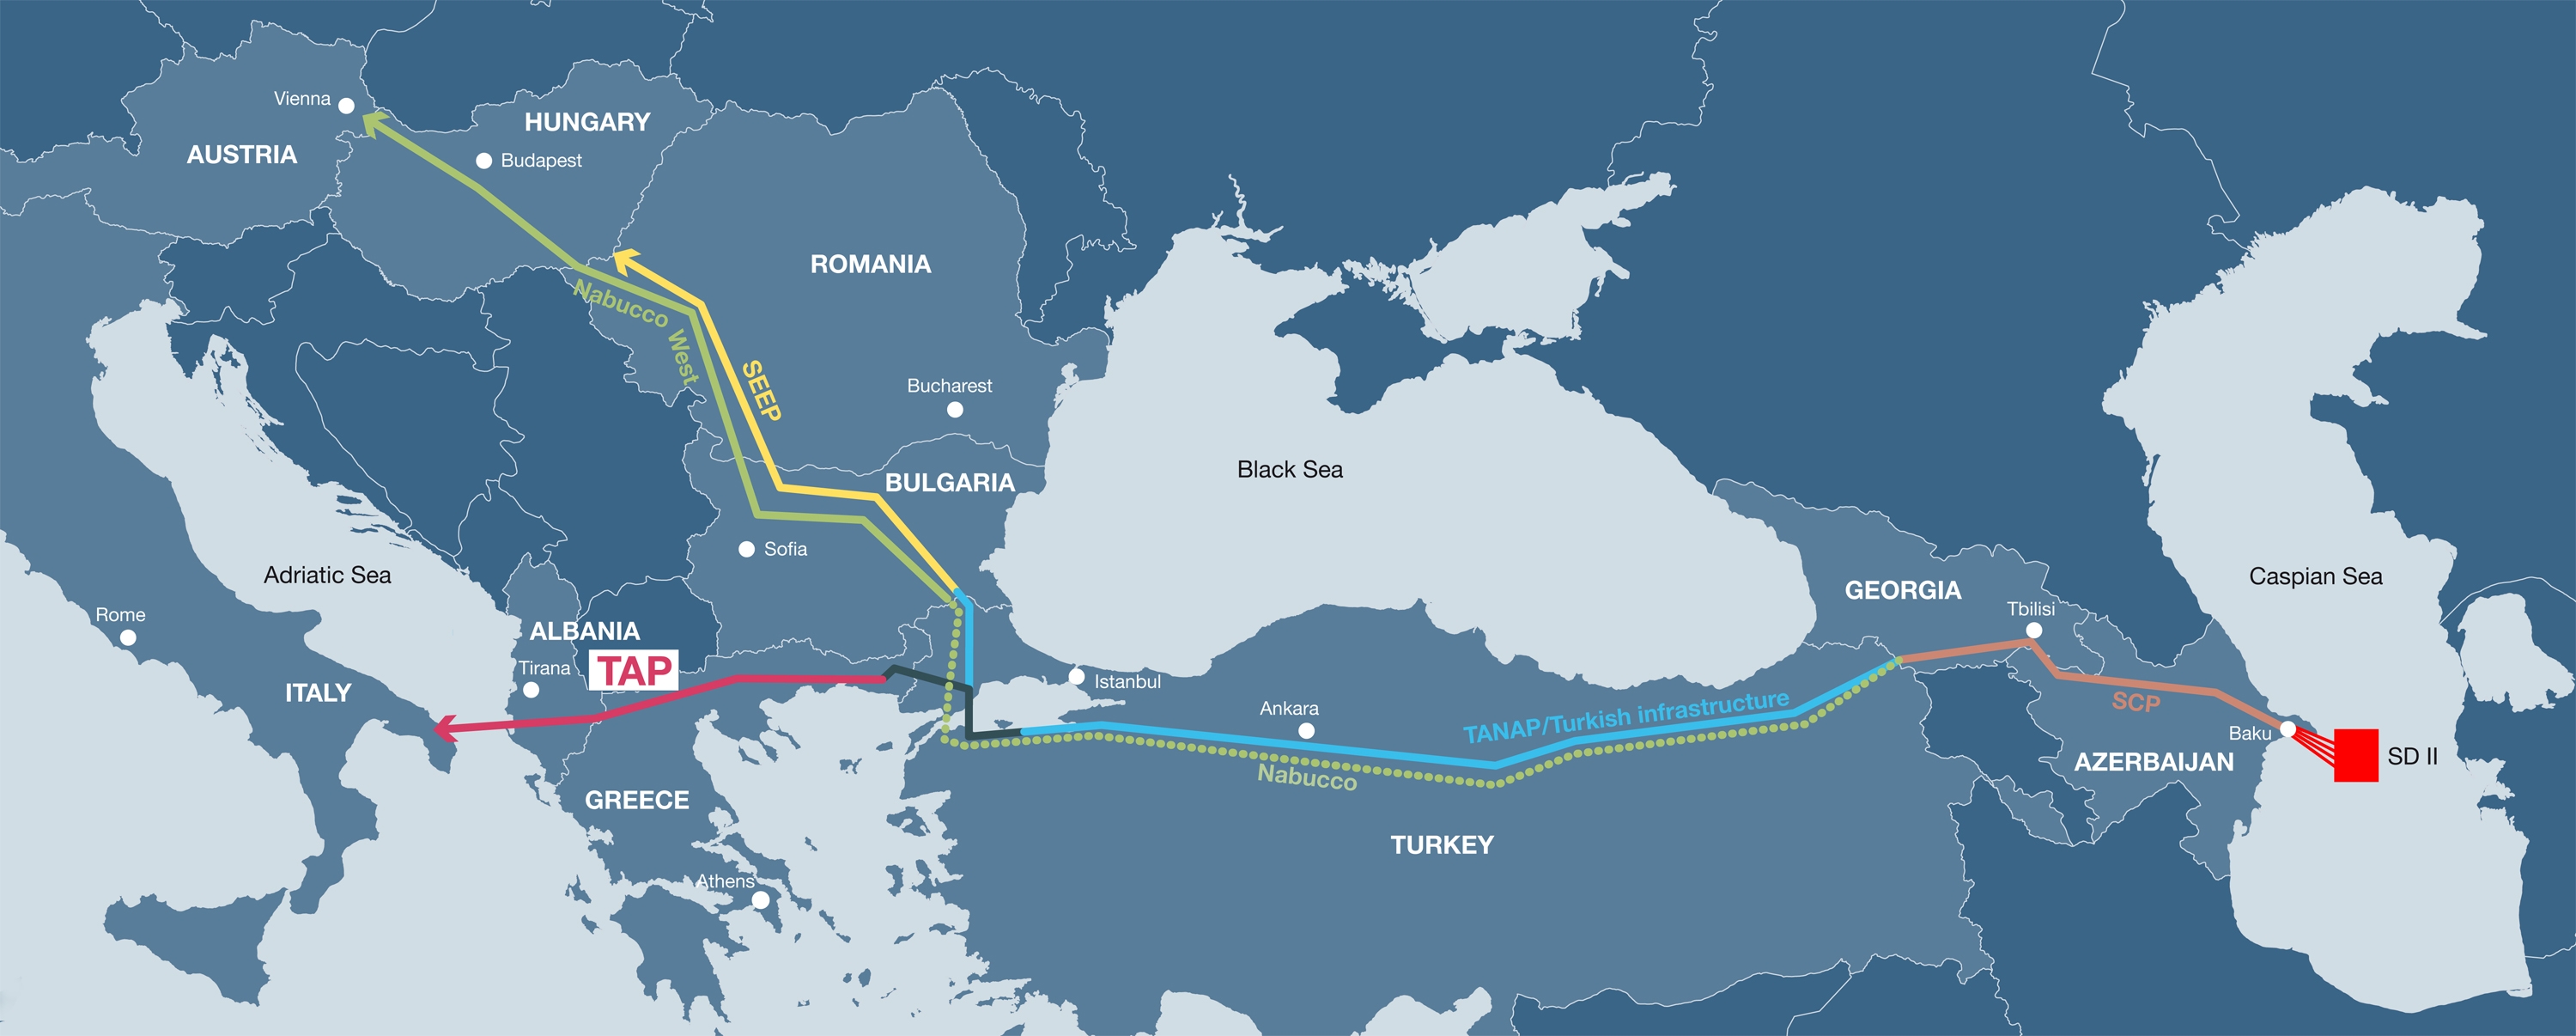 SD_export_routes_2012.jpg